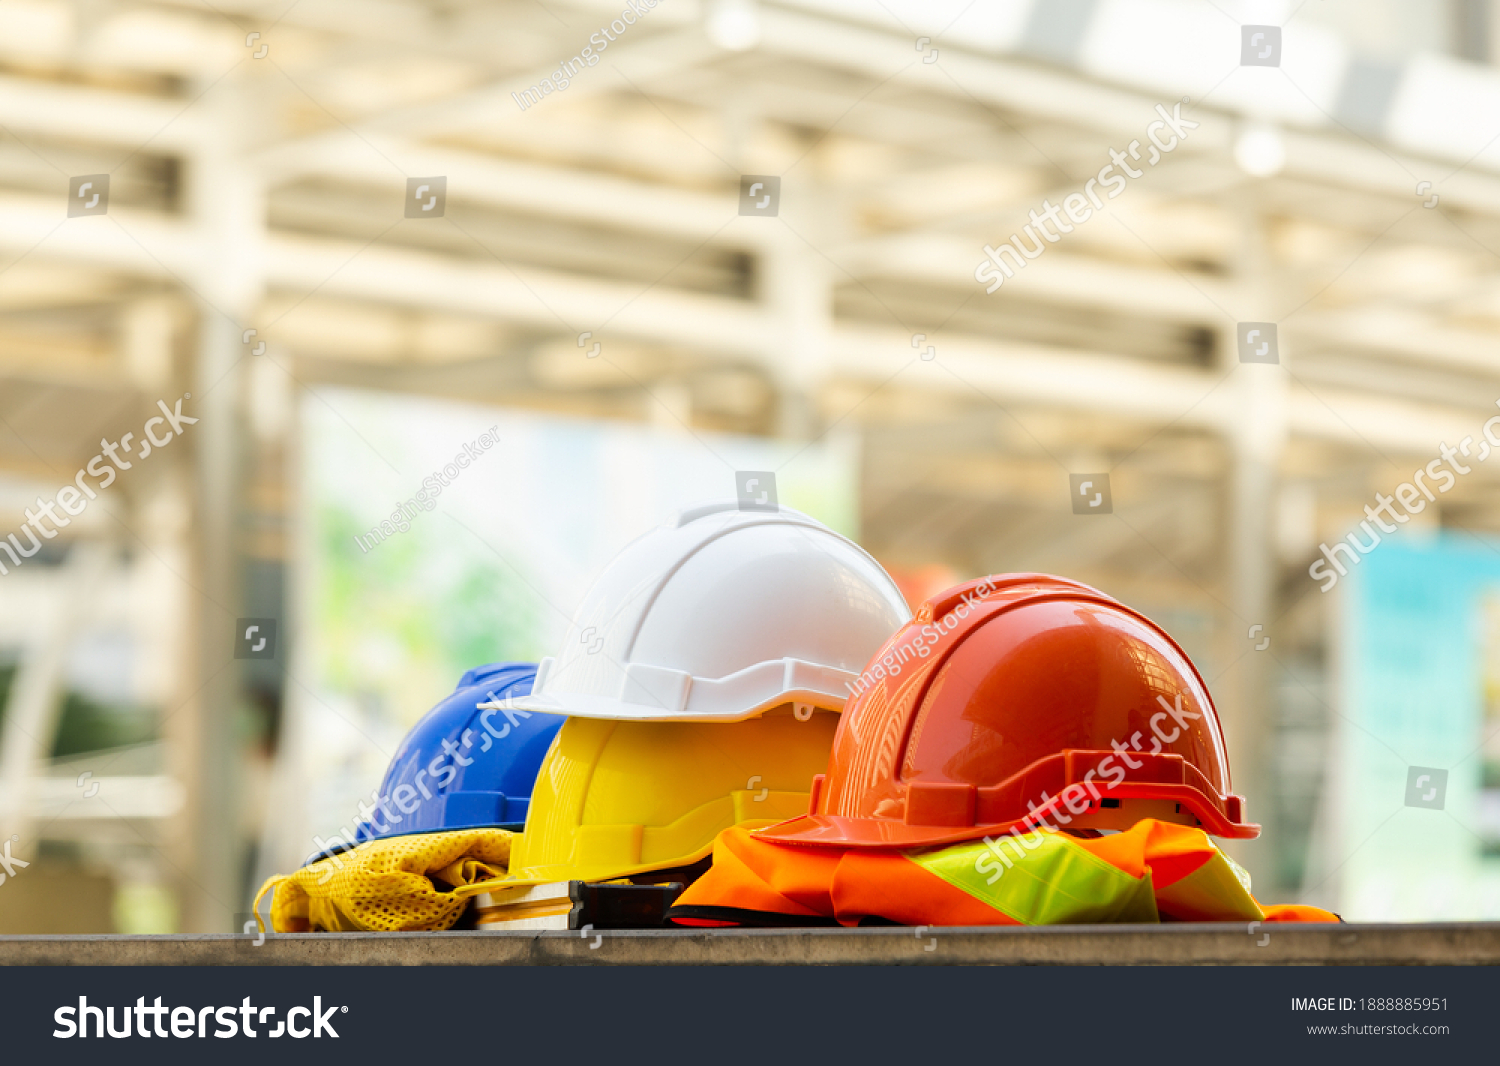 Close up Blue, yellow, white and red hard safety helmet hats for safety project of workman as engineering or project worker place on concrete floor city outdoor. #1888885951